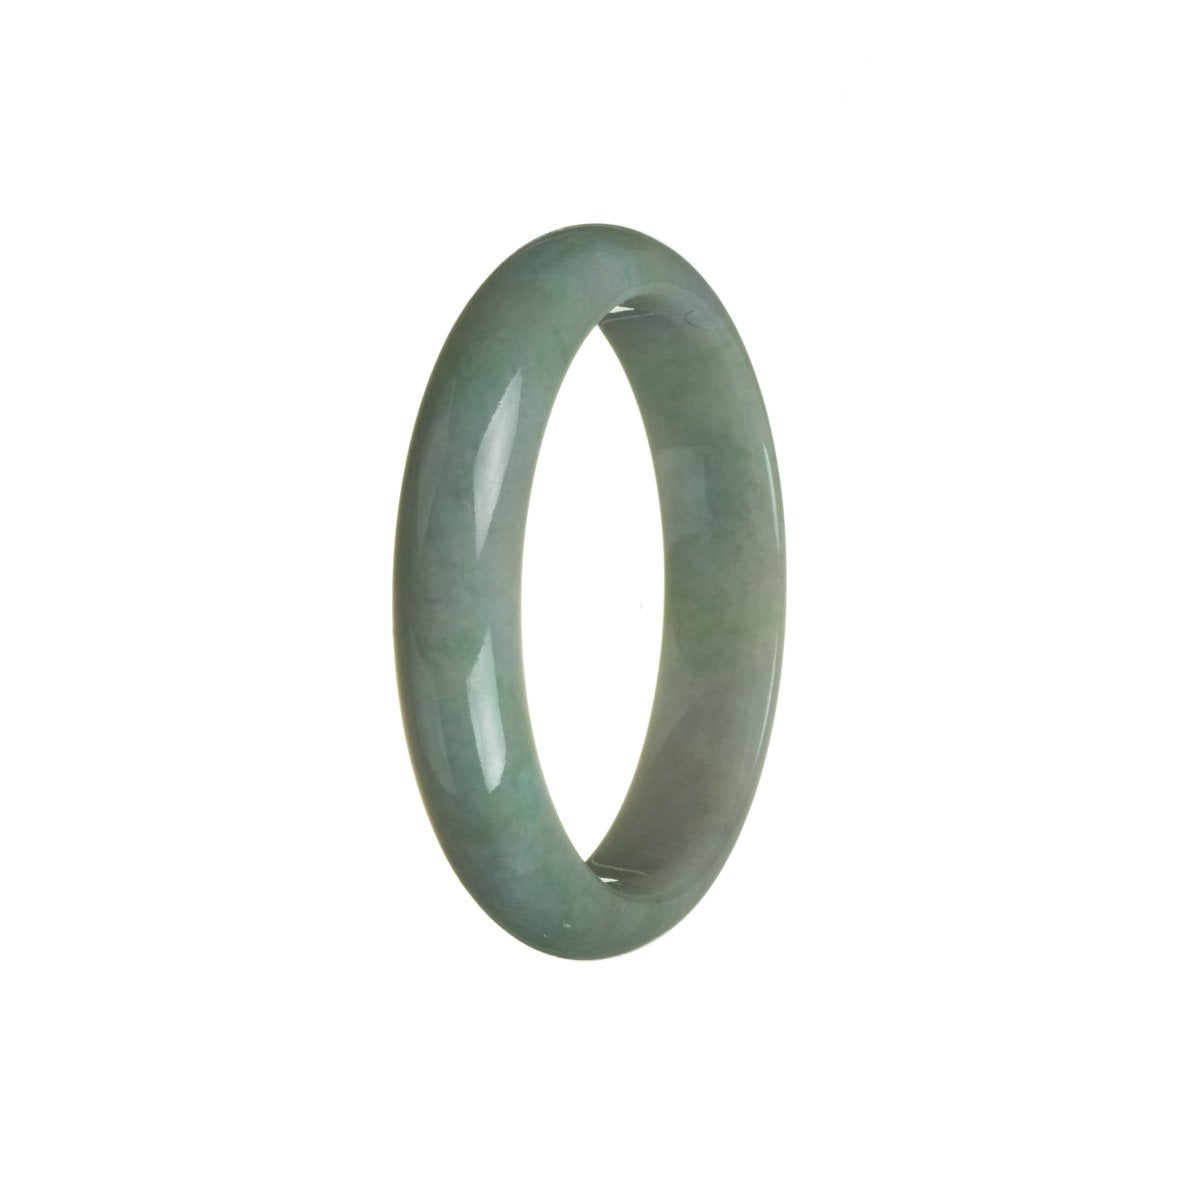 A beautiful half moon-shaped bracelet made of authentic Grade A Green with Grey Burmese Jade, measuring 56mm.